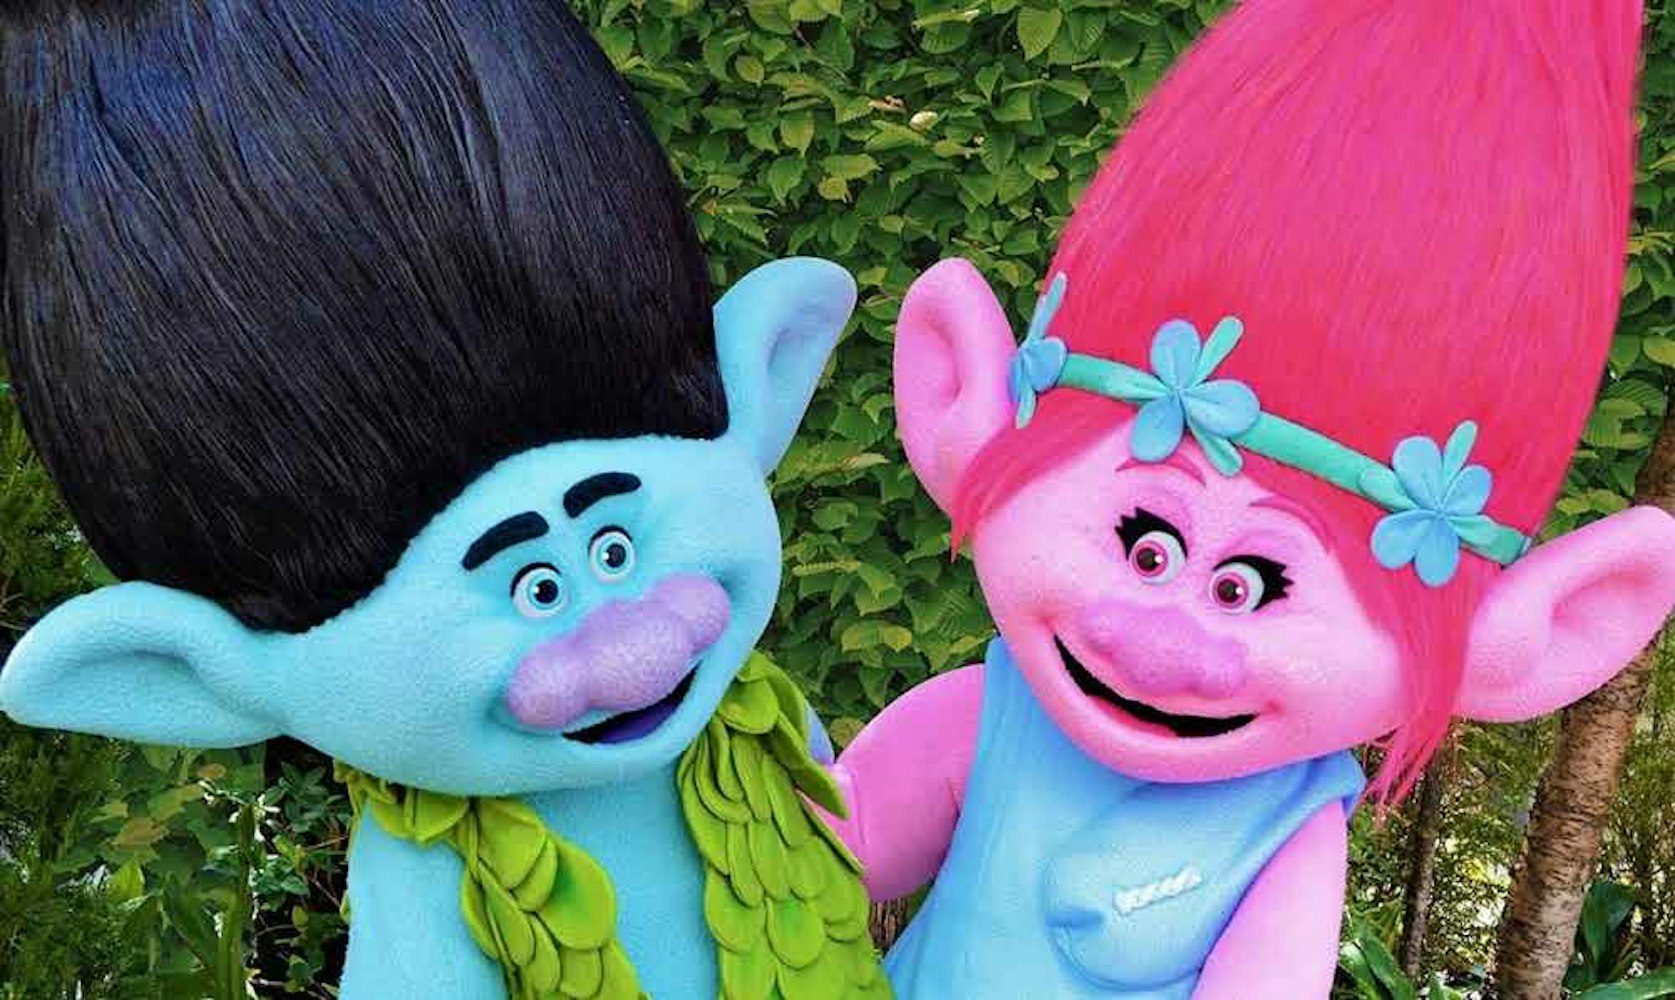 Cover Image for Rumored Trolls Themed Attraction Coming to Universal Orlando